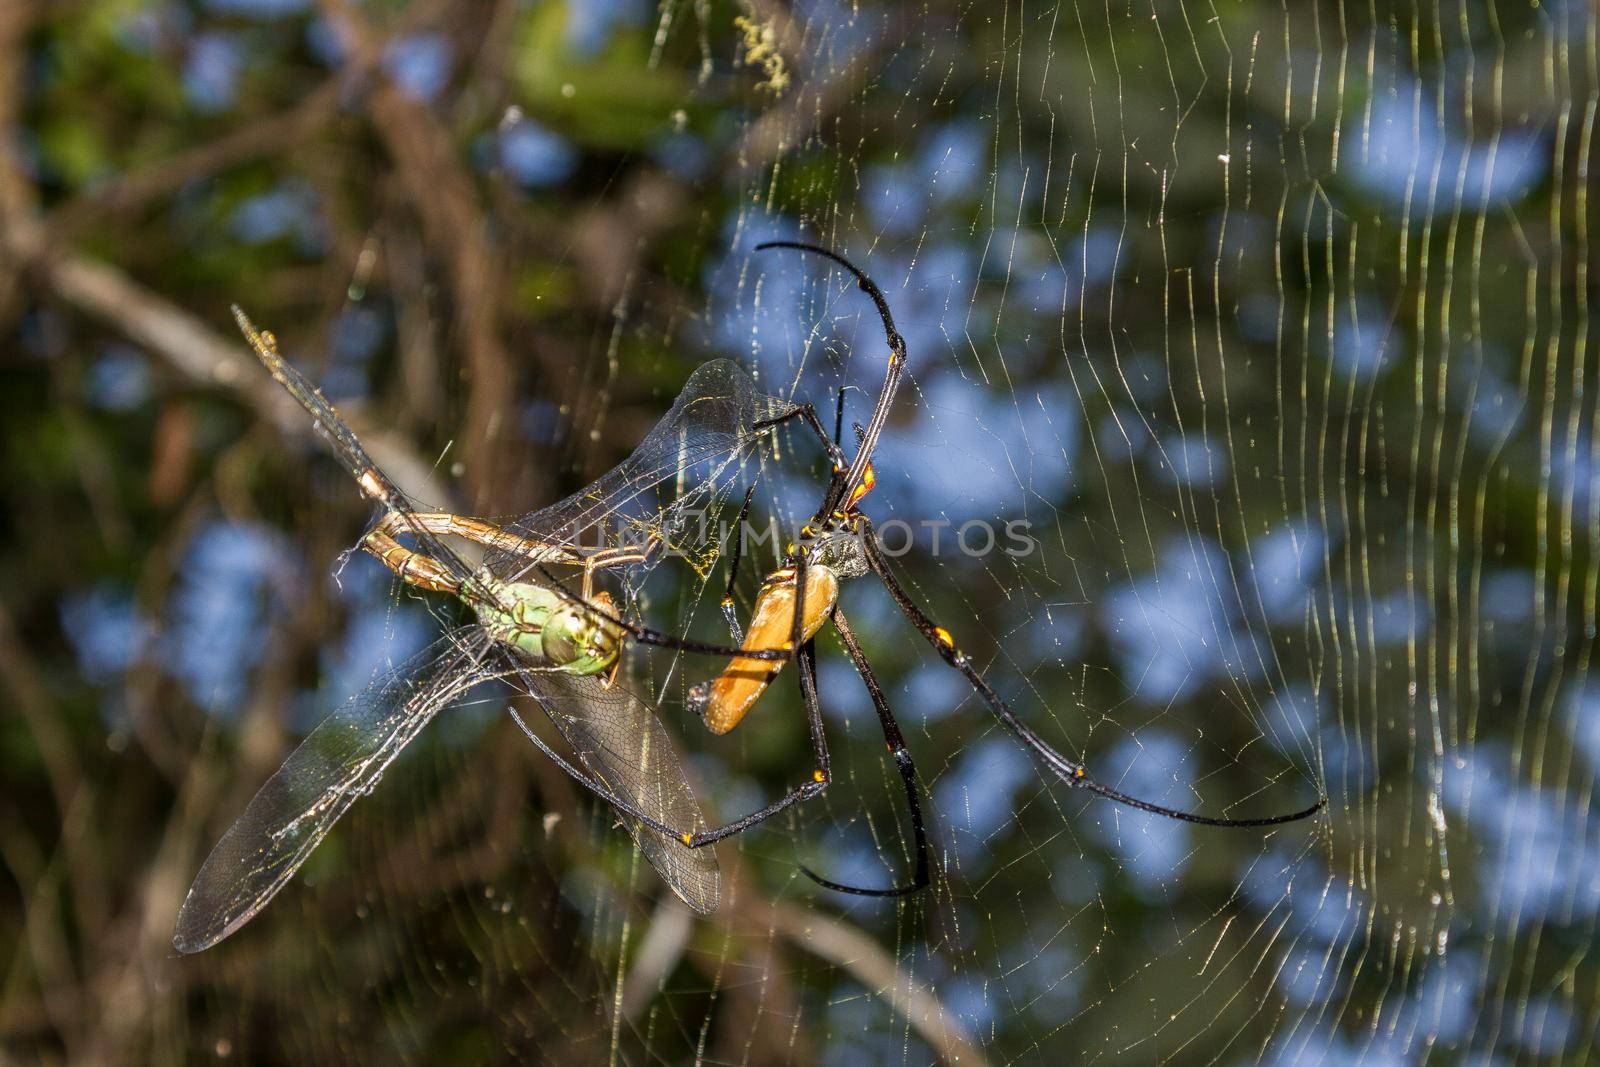 A large northern golden orb weaver or giant golden orb weaver spider is eating his prey. Nephila pilipes typically found in Asia and Australia, kakadu national park by bettercallcurry